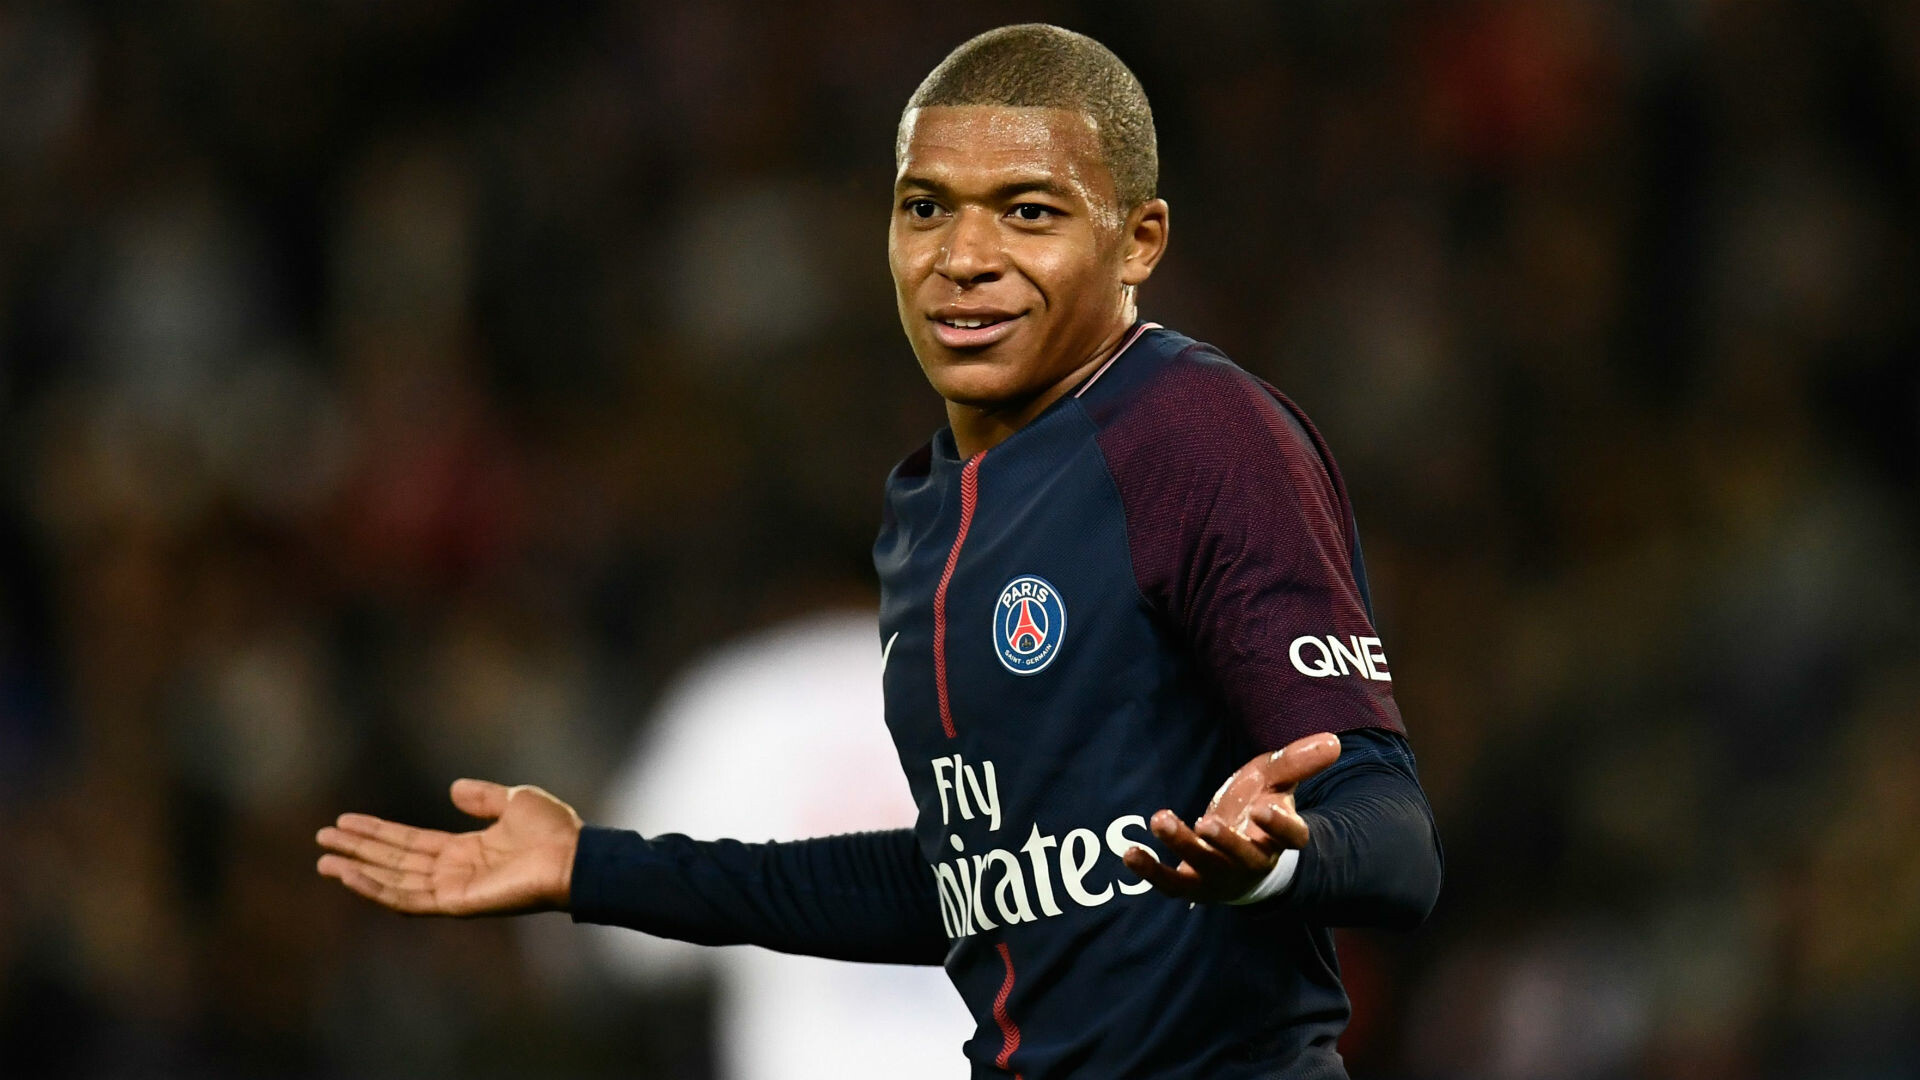 Kylian Mbappe, France wallpaper, HD images, Gallery collection, 1920x1080 Full HD Desktop